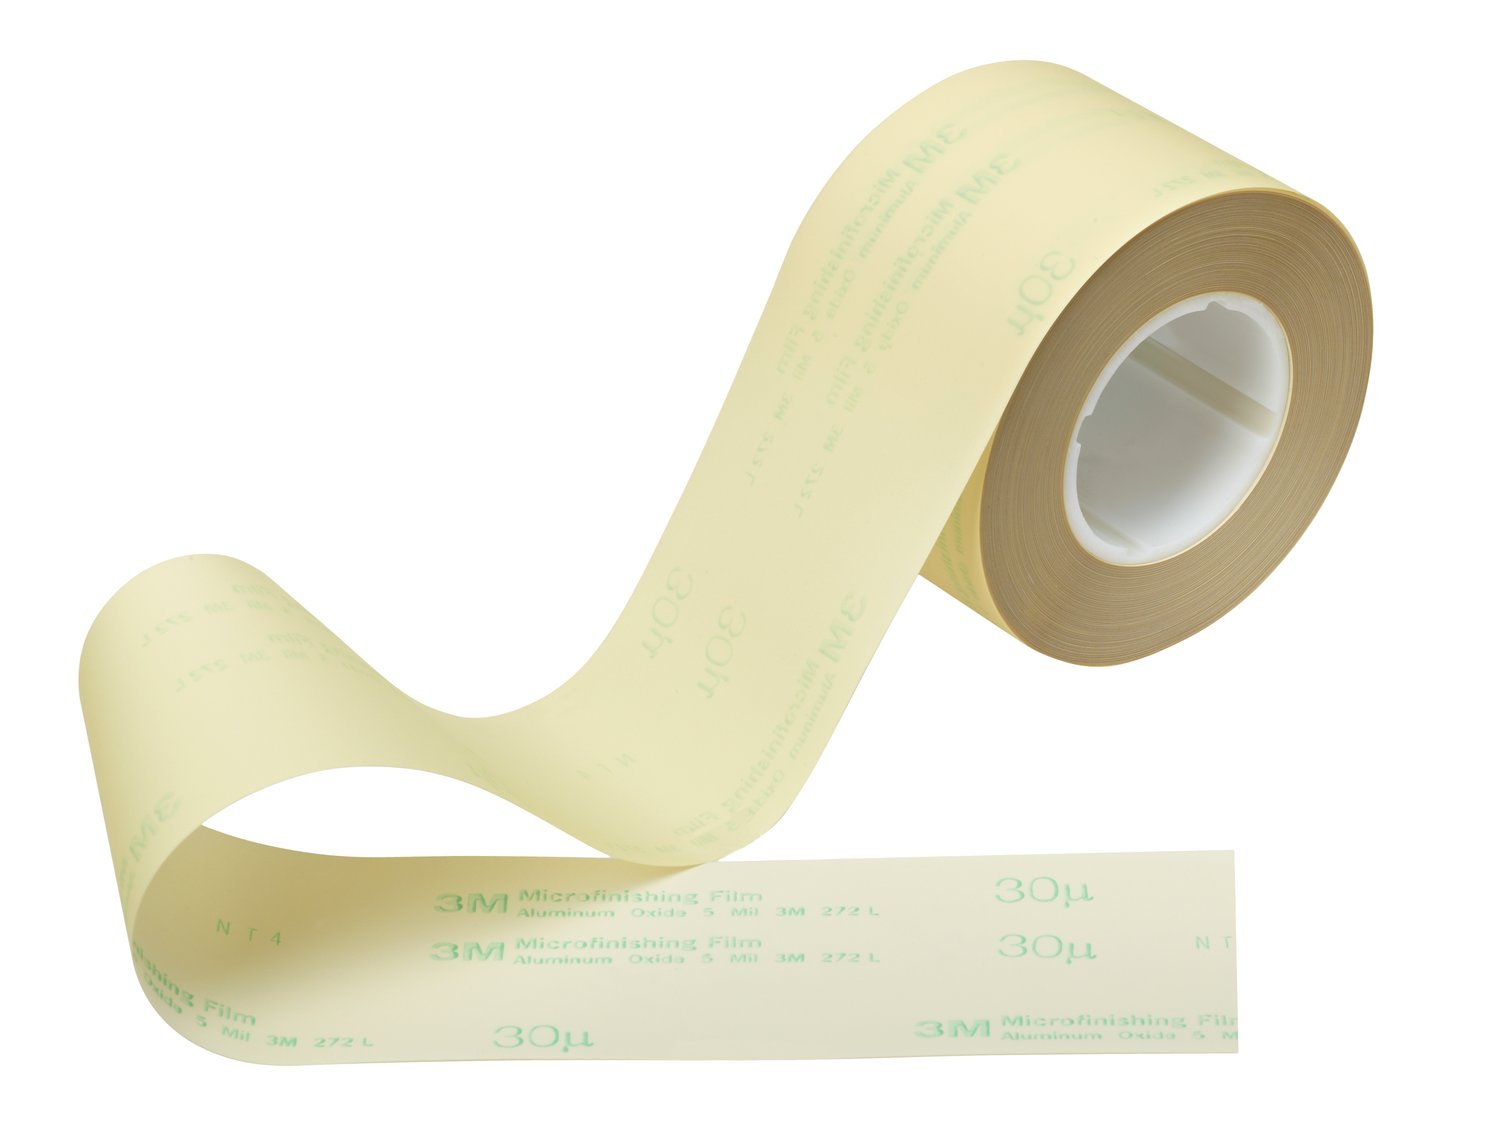 7100231700 - 3M Microfinishing Film Roll 272L, 30 Mic 5MIL, Type UK, 16 in x 150 ft
x 3 in (406.4mmx45.75m), Keyed Core, ASO